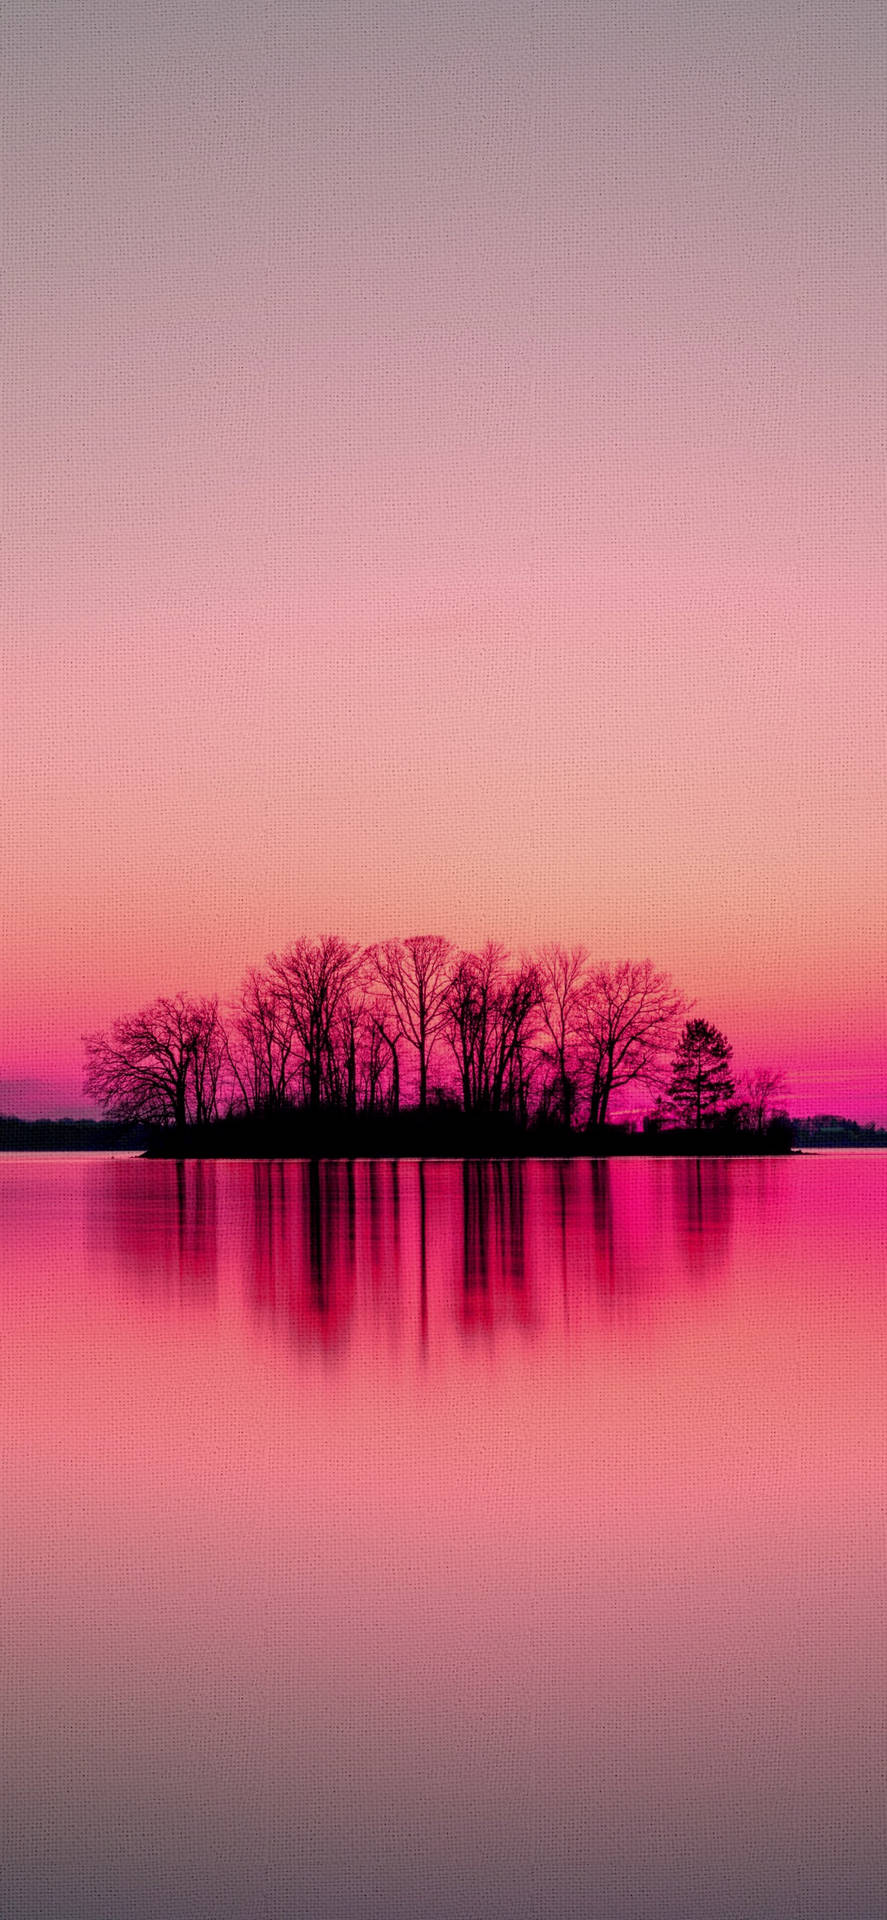 Enjoy The Stunning Hues Of A Pink Sunset From Your Iphone. Wallpaper